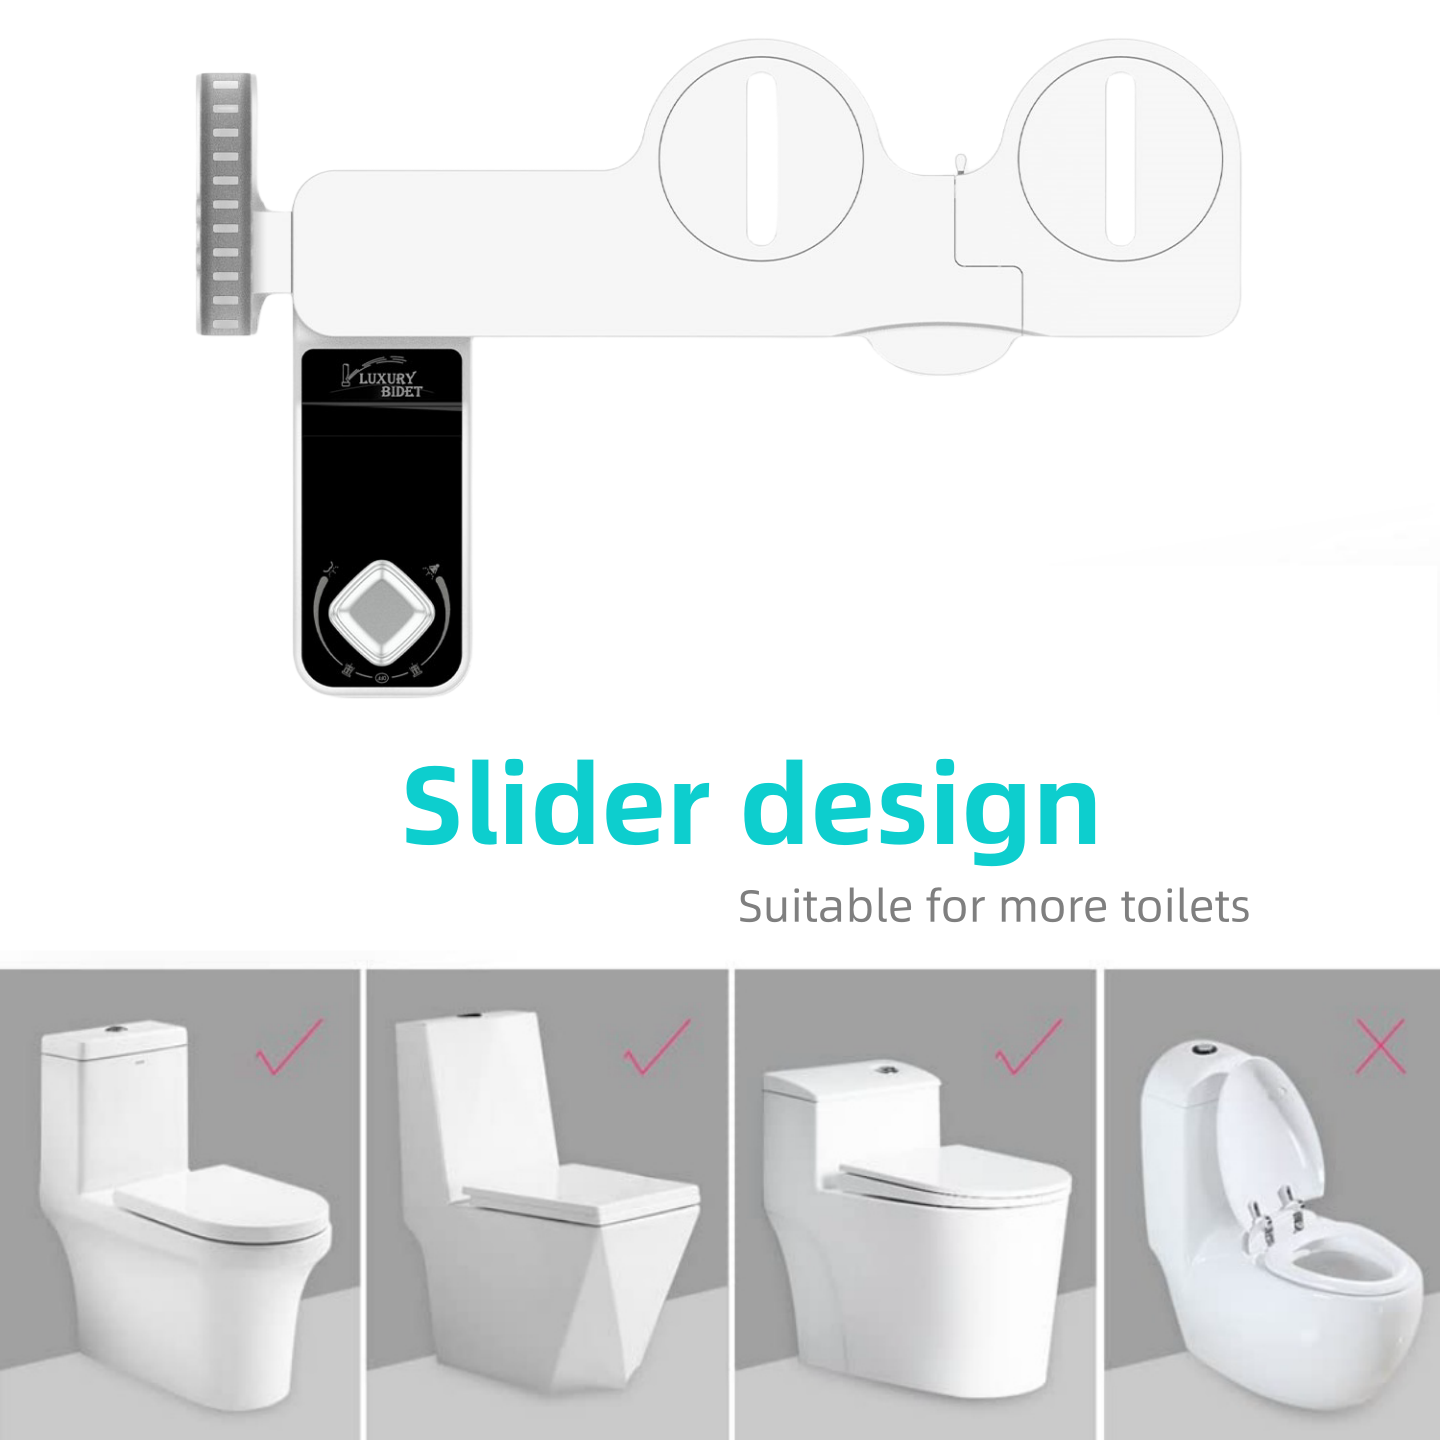 Self-Cleaning and Retractable Nozzle, Fresh Water Spray Non-Electric Mechanical Toilet bidet Seat Attachment